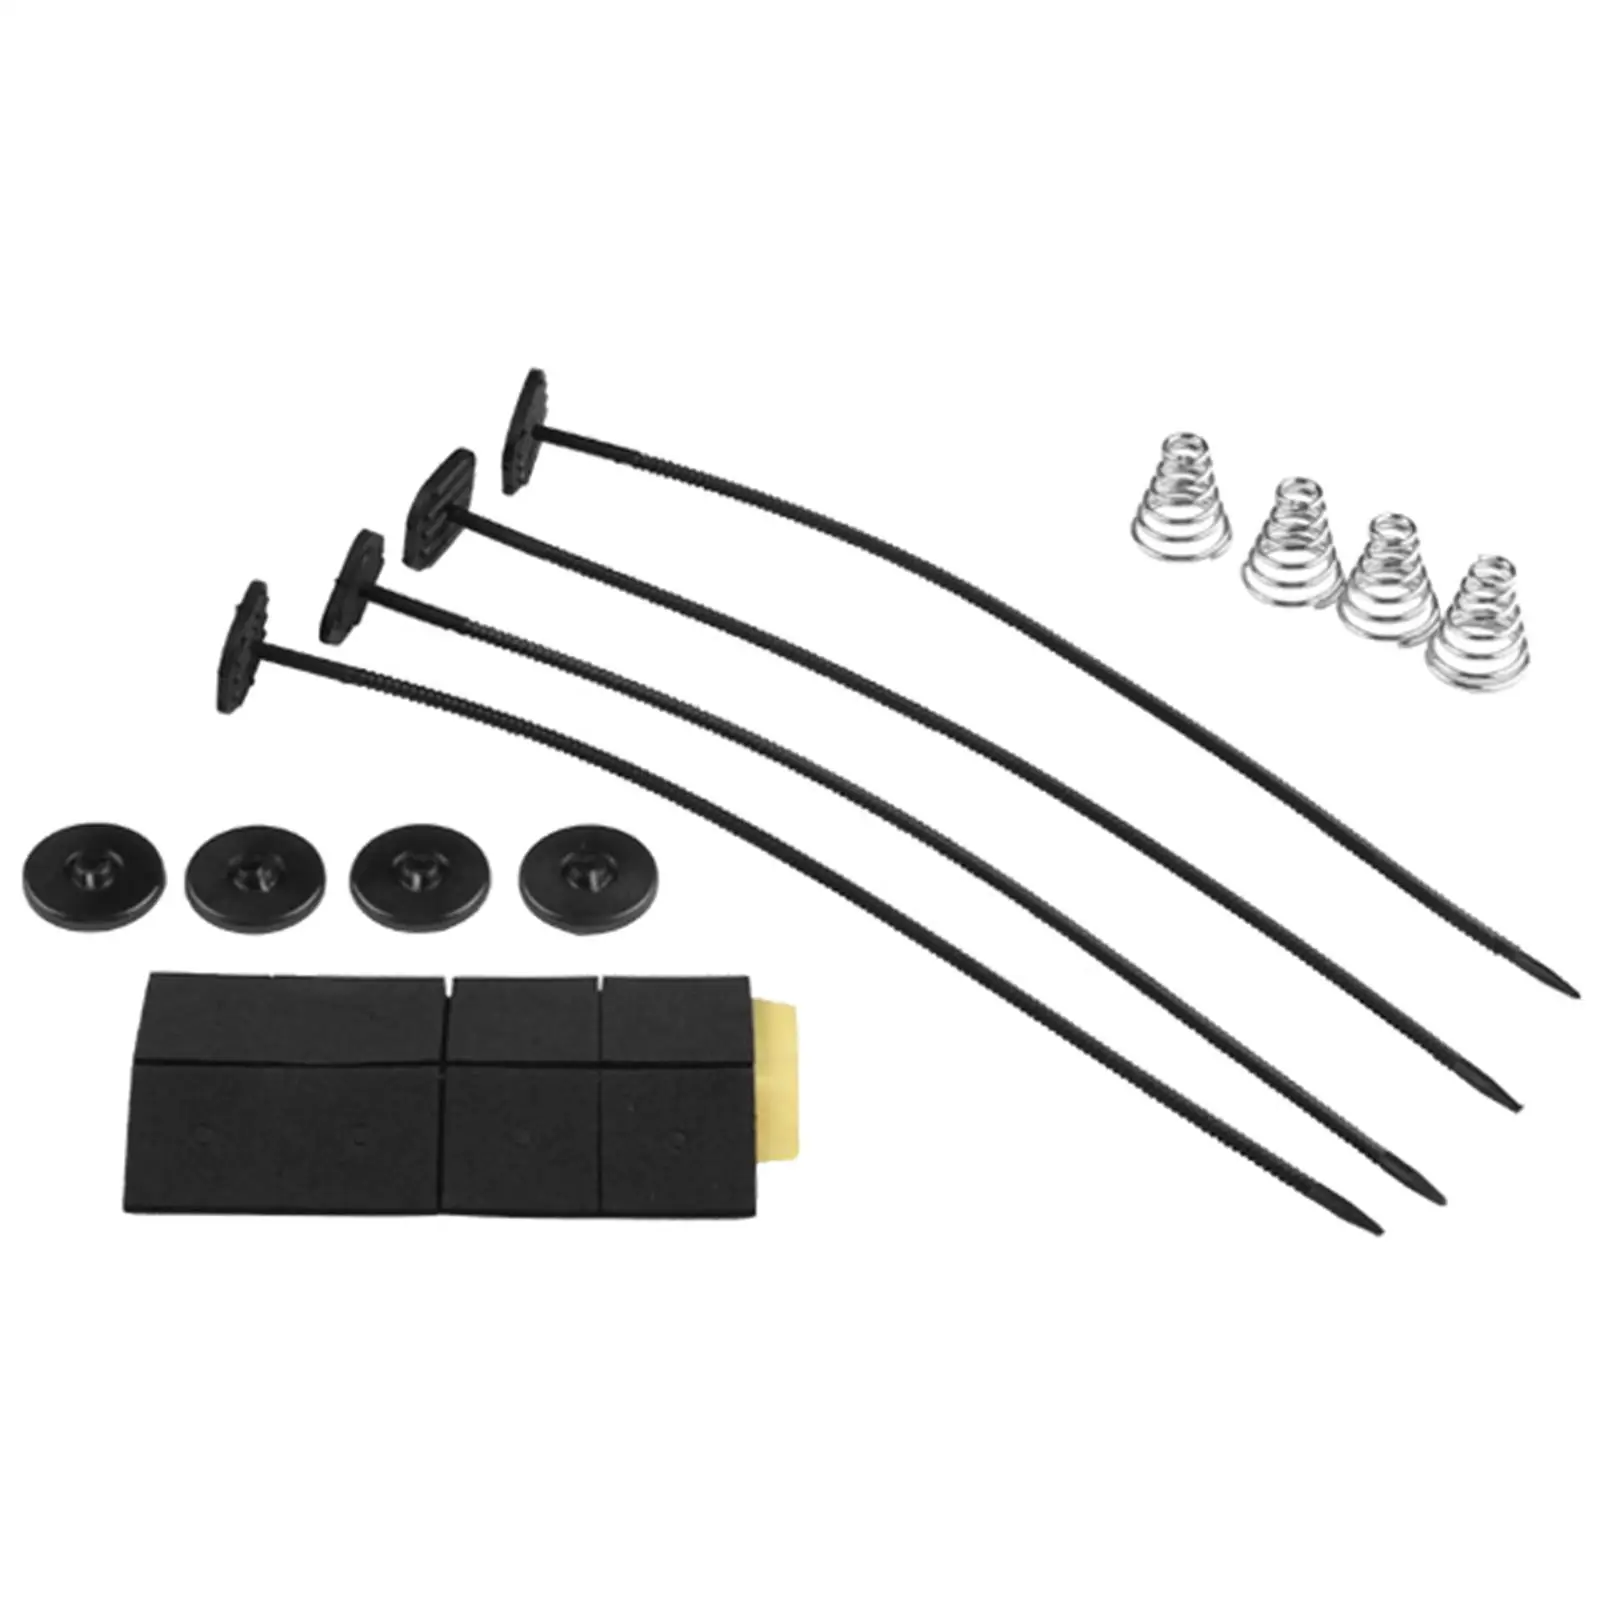 Rod Locking Mounting Kit, 13001, Fit for Electric Fans Coolers, ACC Replacement Parts